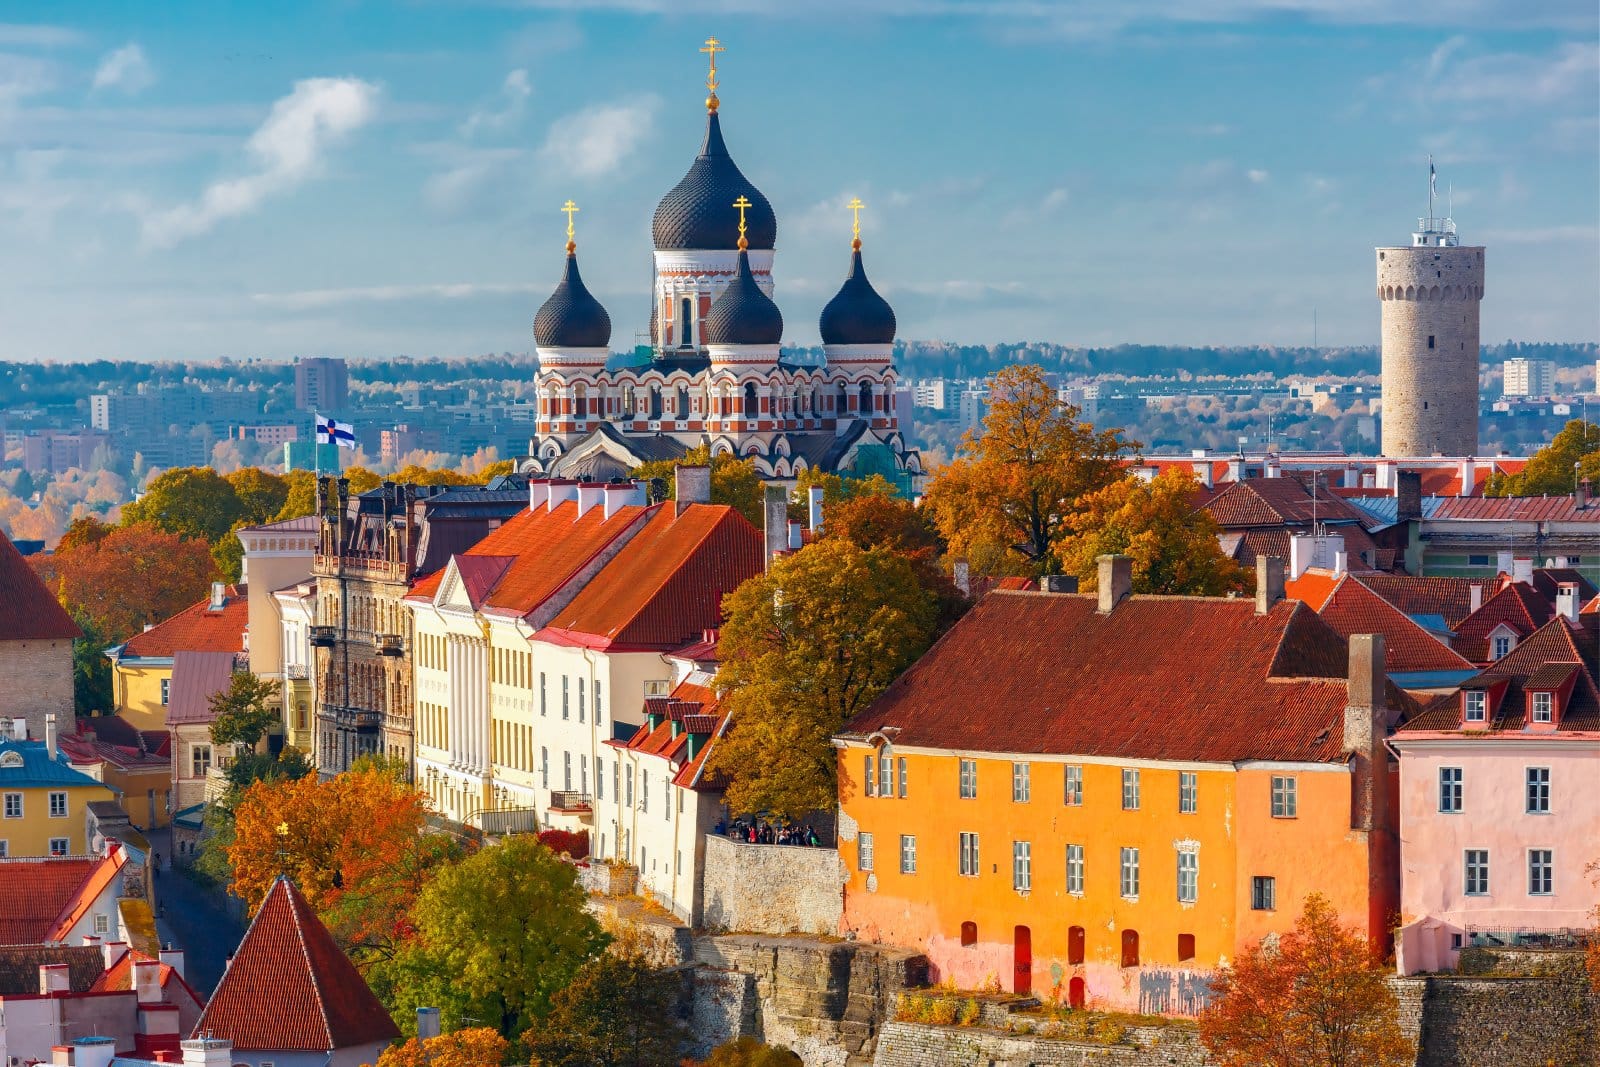 <p>Welcome to Tallinn, Estonia, the digital hub of Europe where medieval charm meets modern innovation. With rent prices for one-bedroom apartments averaging around $500 to $700 per month, you can embrace the tech-savvy lifestyle of Tallinn without breaking the bank.</p>